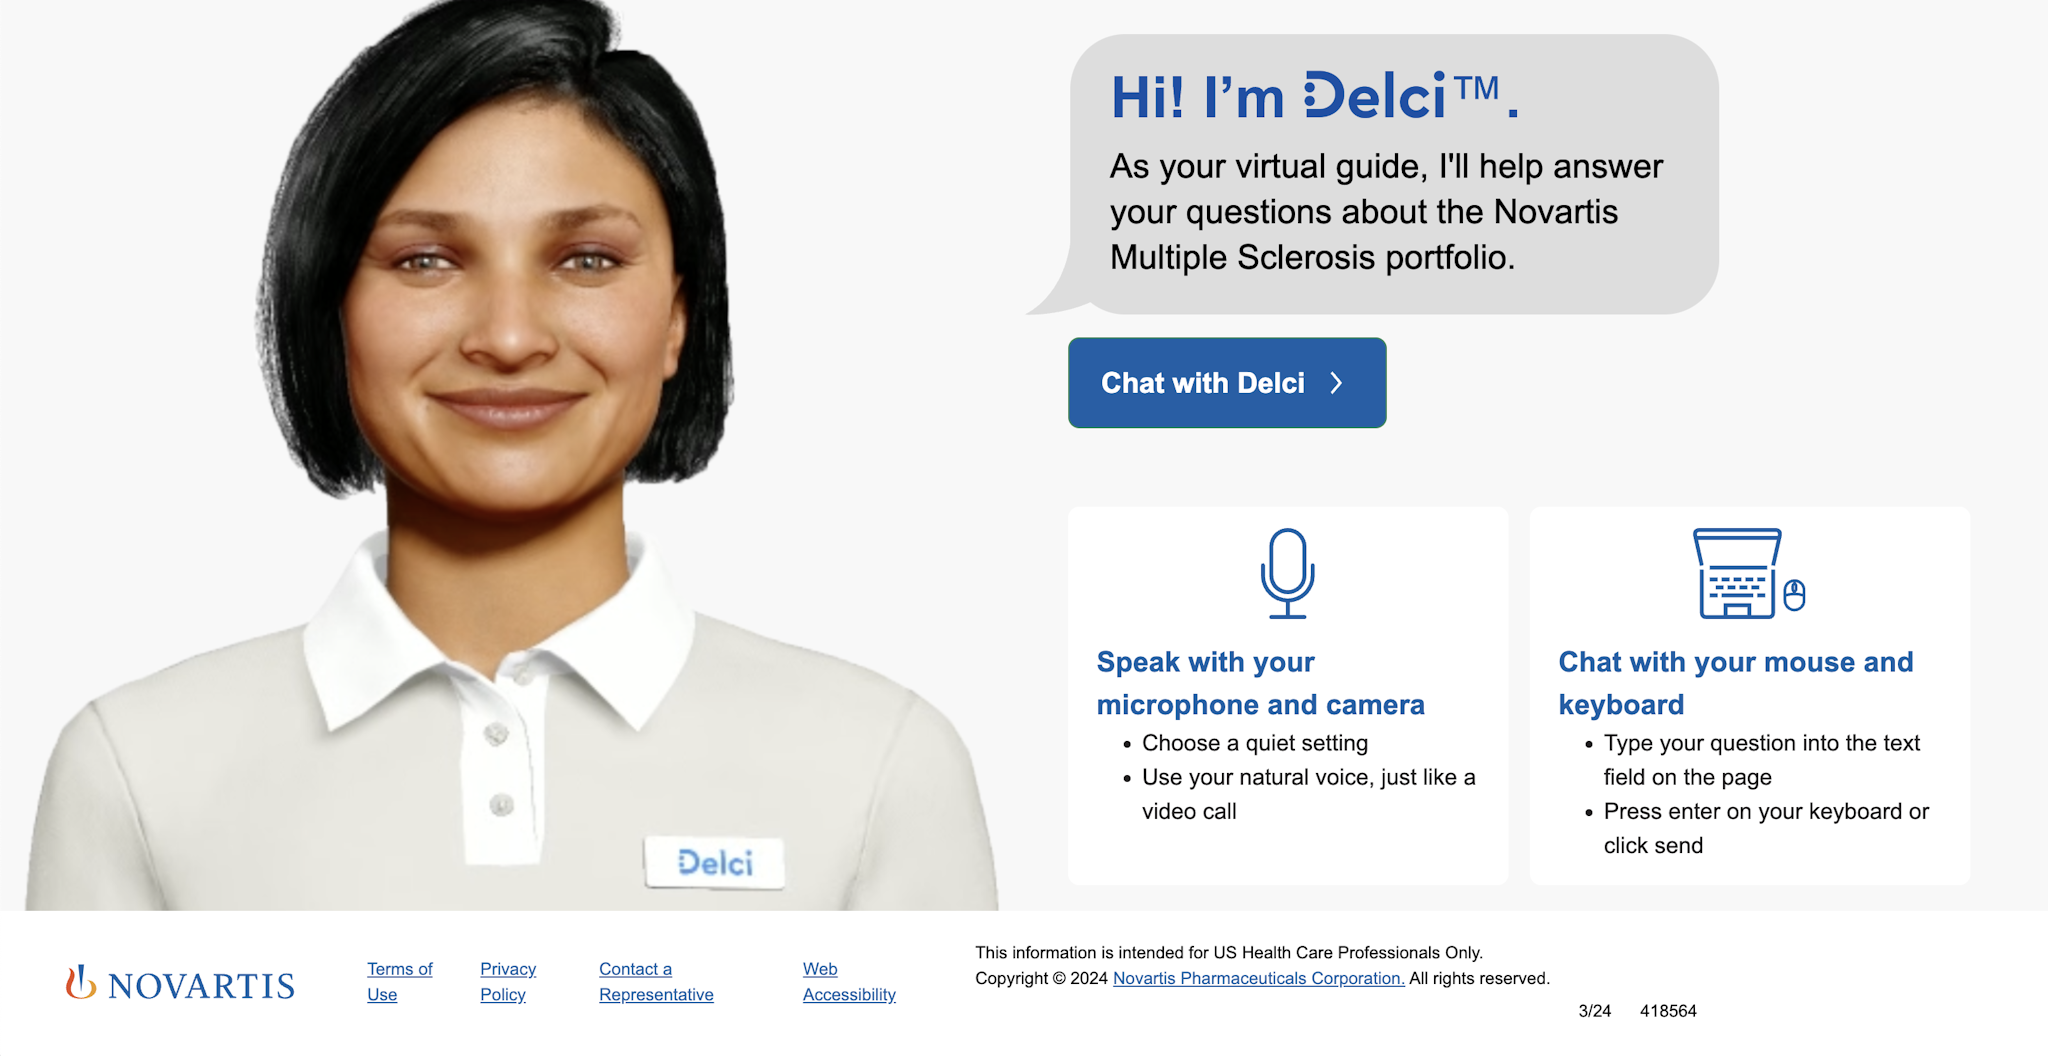 The landing page for DELCI